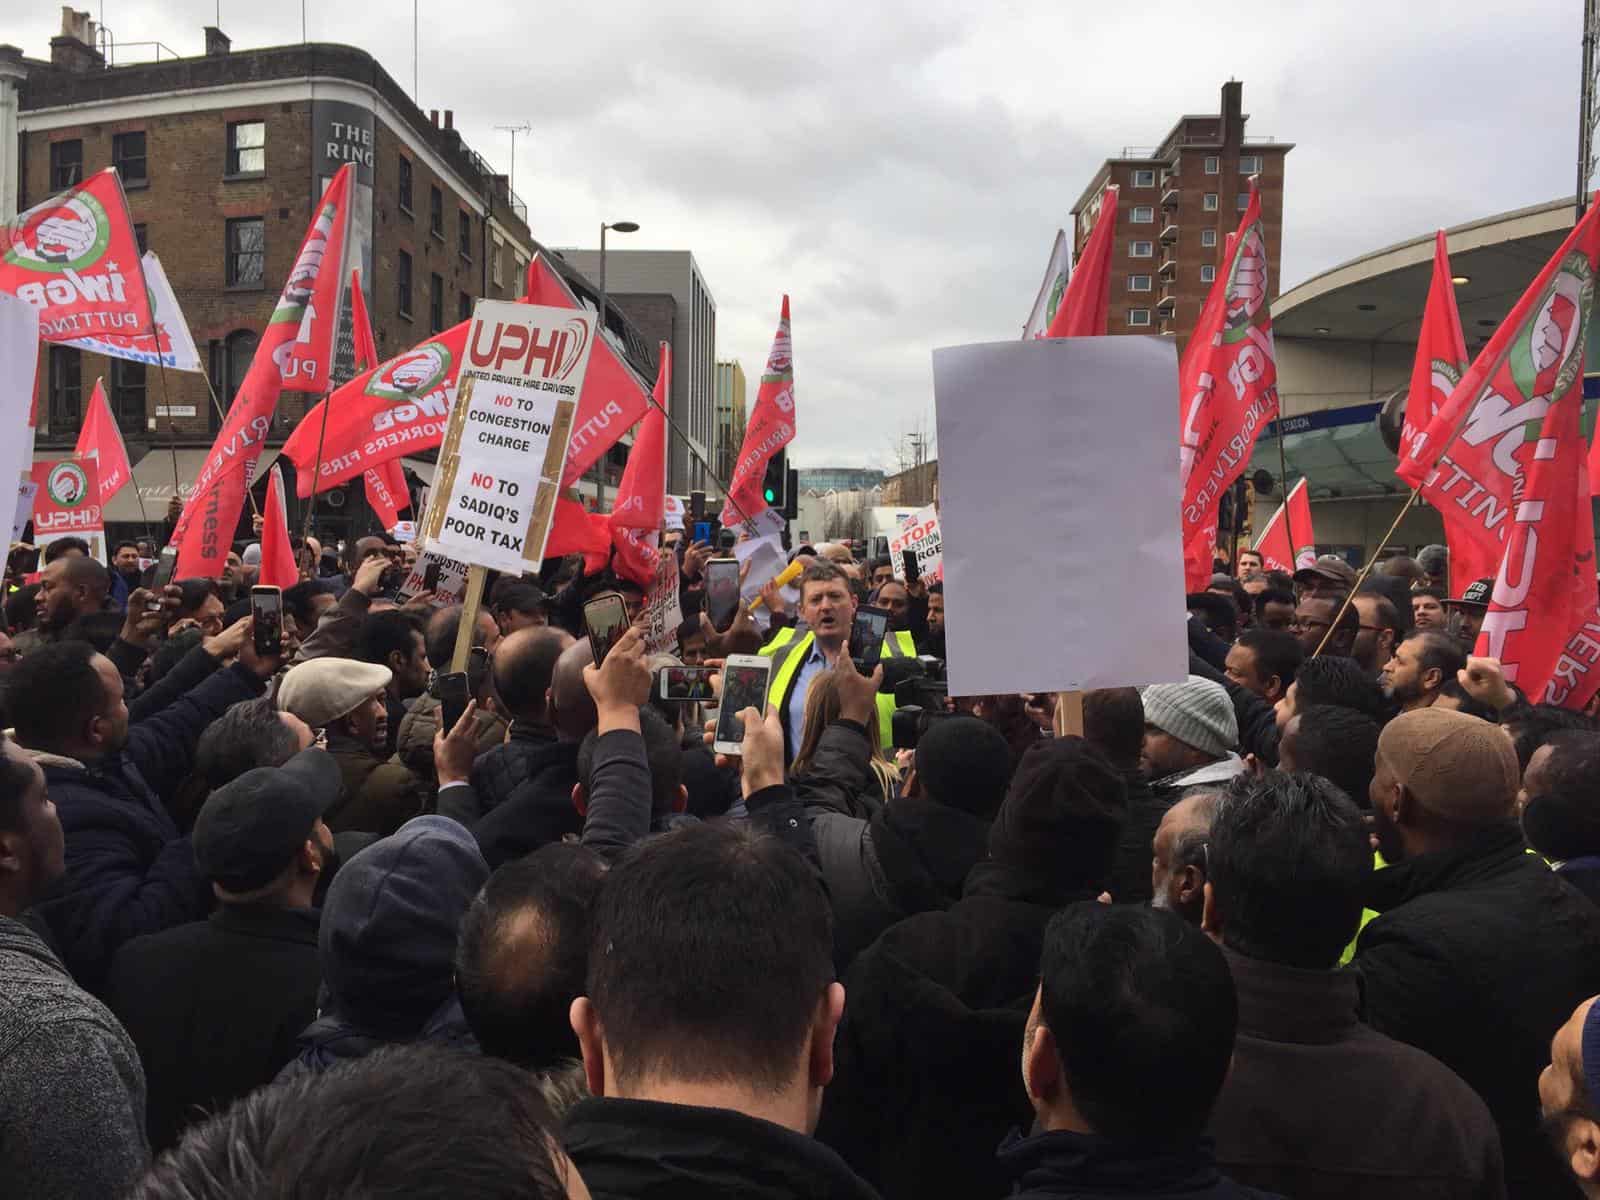 The scene from last Monday's protest which the private-hire drivers have vowed to continue today